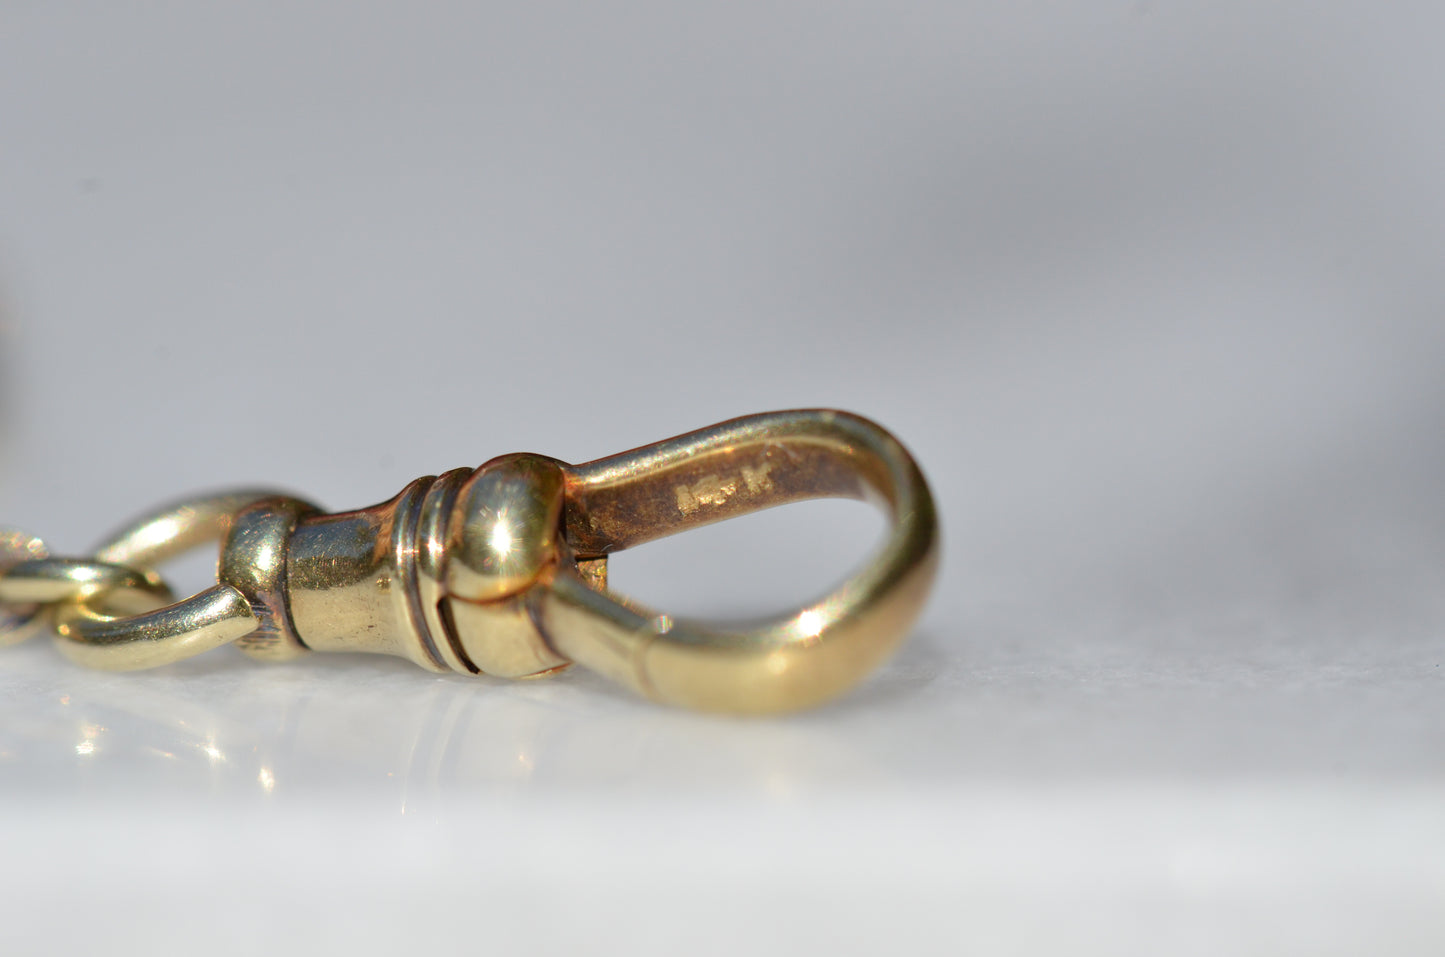 A closely cropped photo of the gold purity stamp on the inside of the clasp.